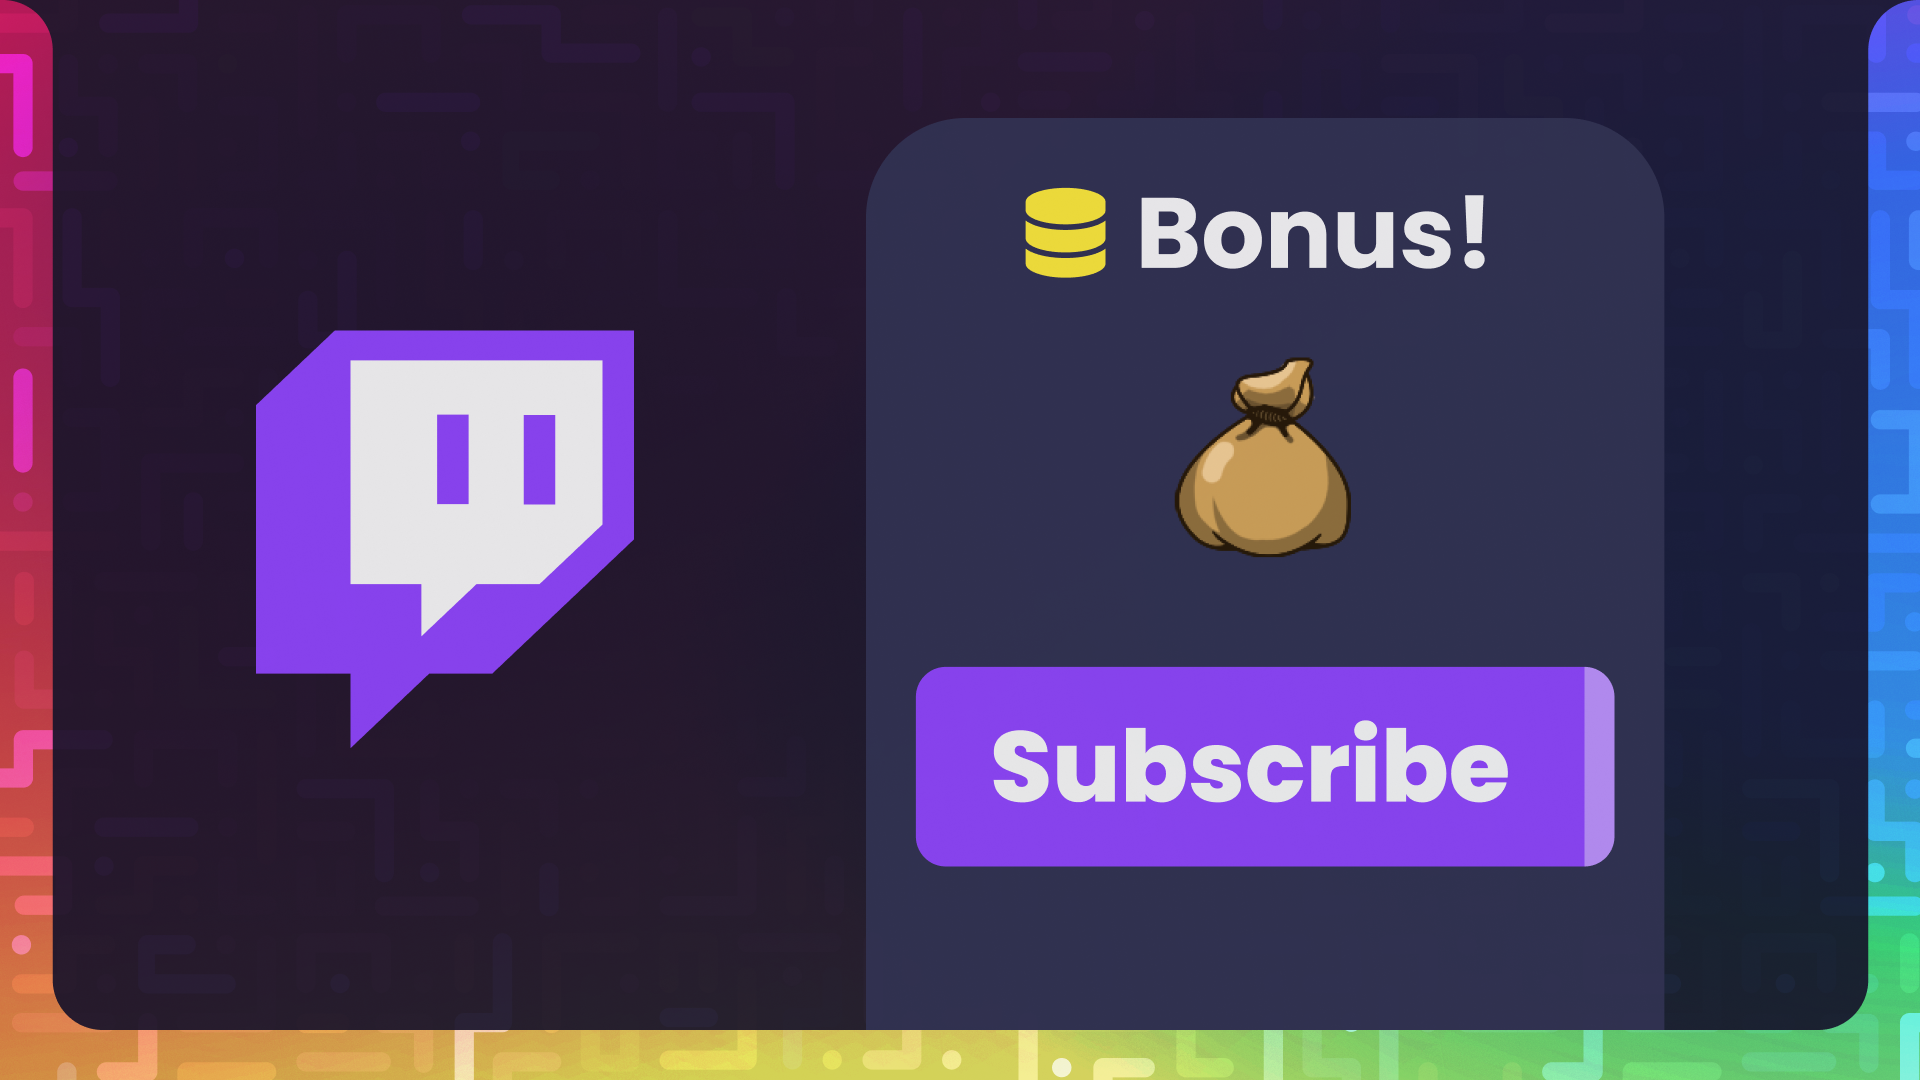 How to Give your Twitch Subscribers Free Crowd Control Coins